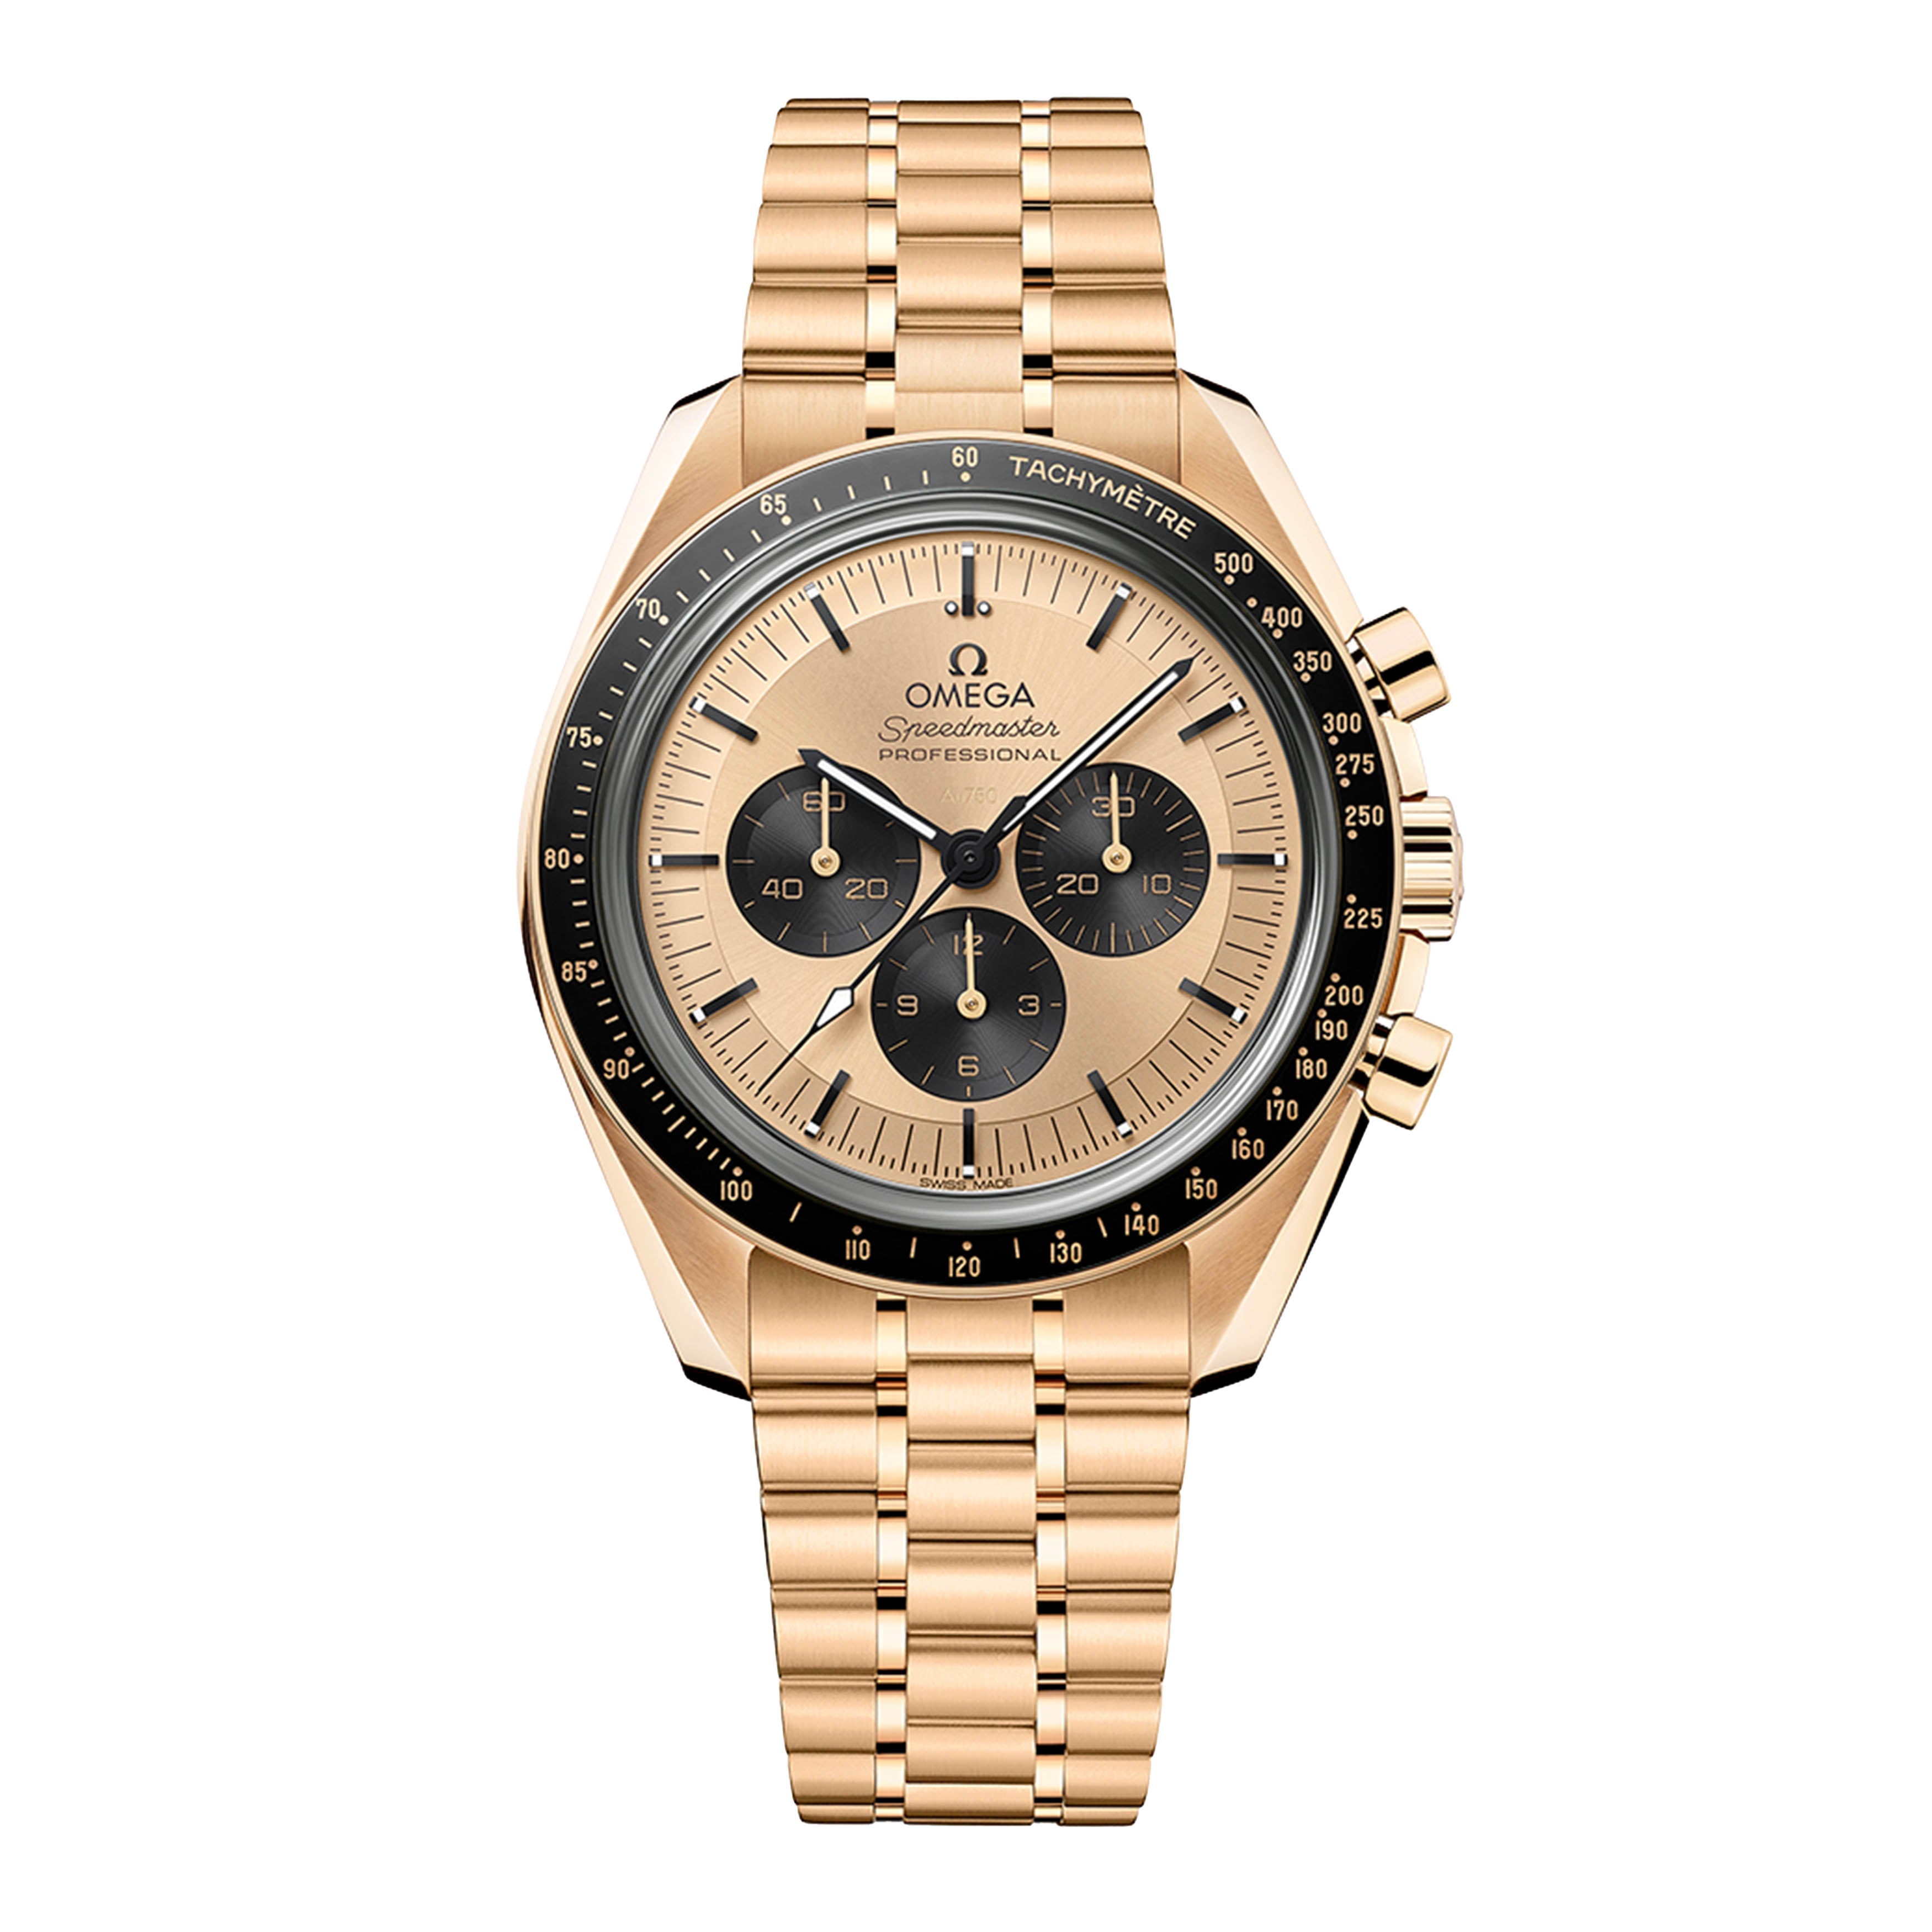 Omega Speedmaster Professional Moonwatch Watch, 42mm Gold Dial, 310.60.42.50.99.002